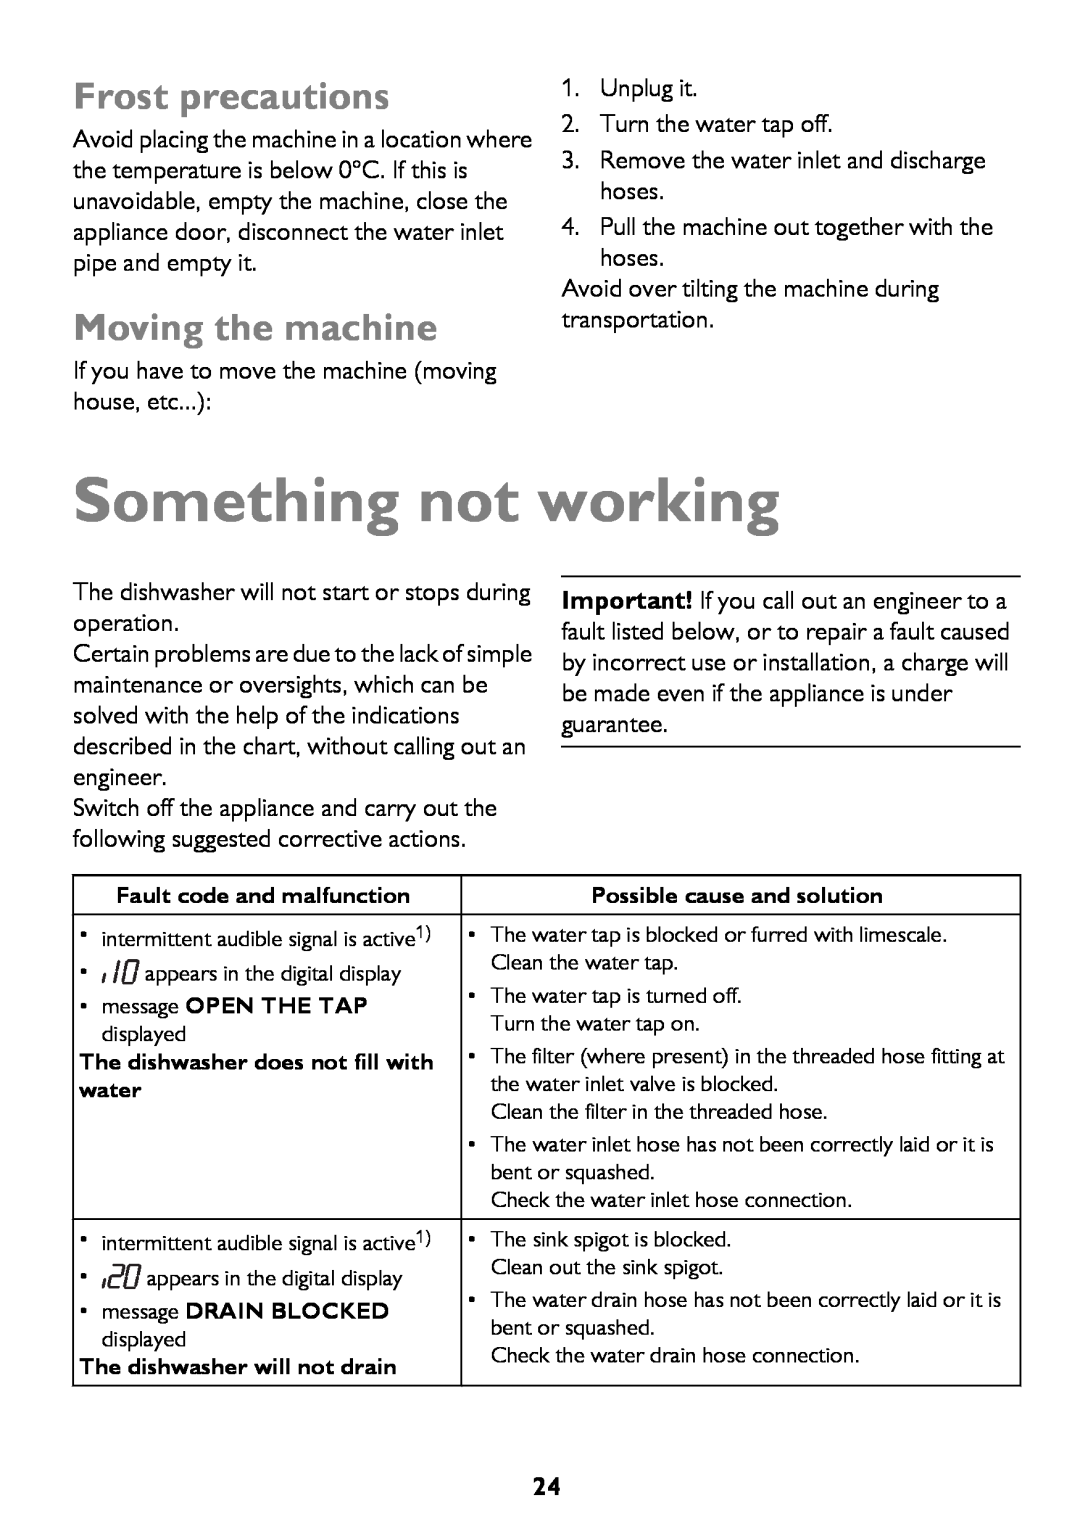 John Lewis JLDWW 1206 instruction manual Something not working, Frost precautions, Moving the machine 